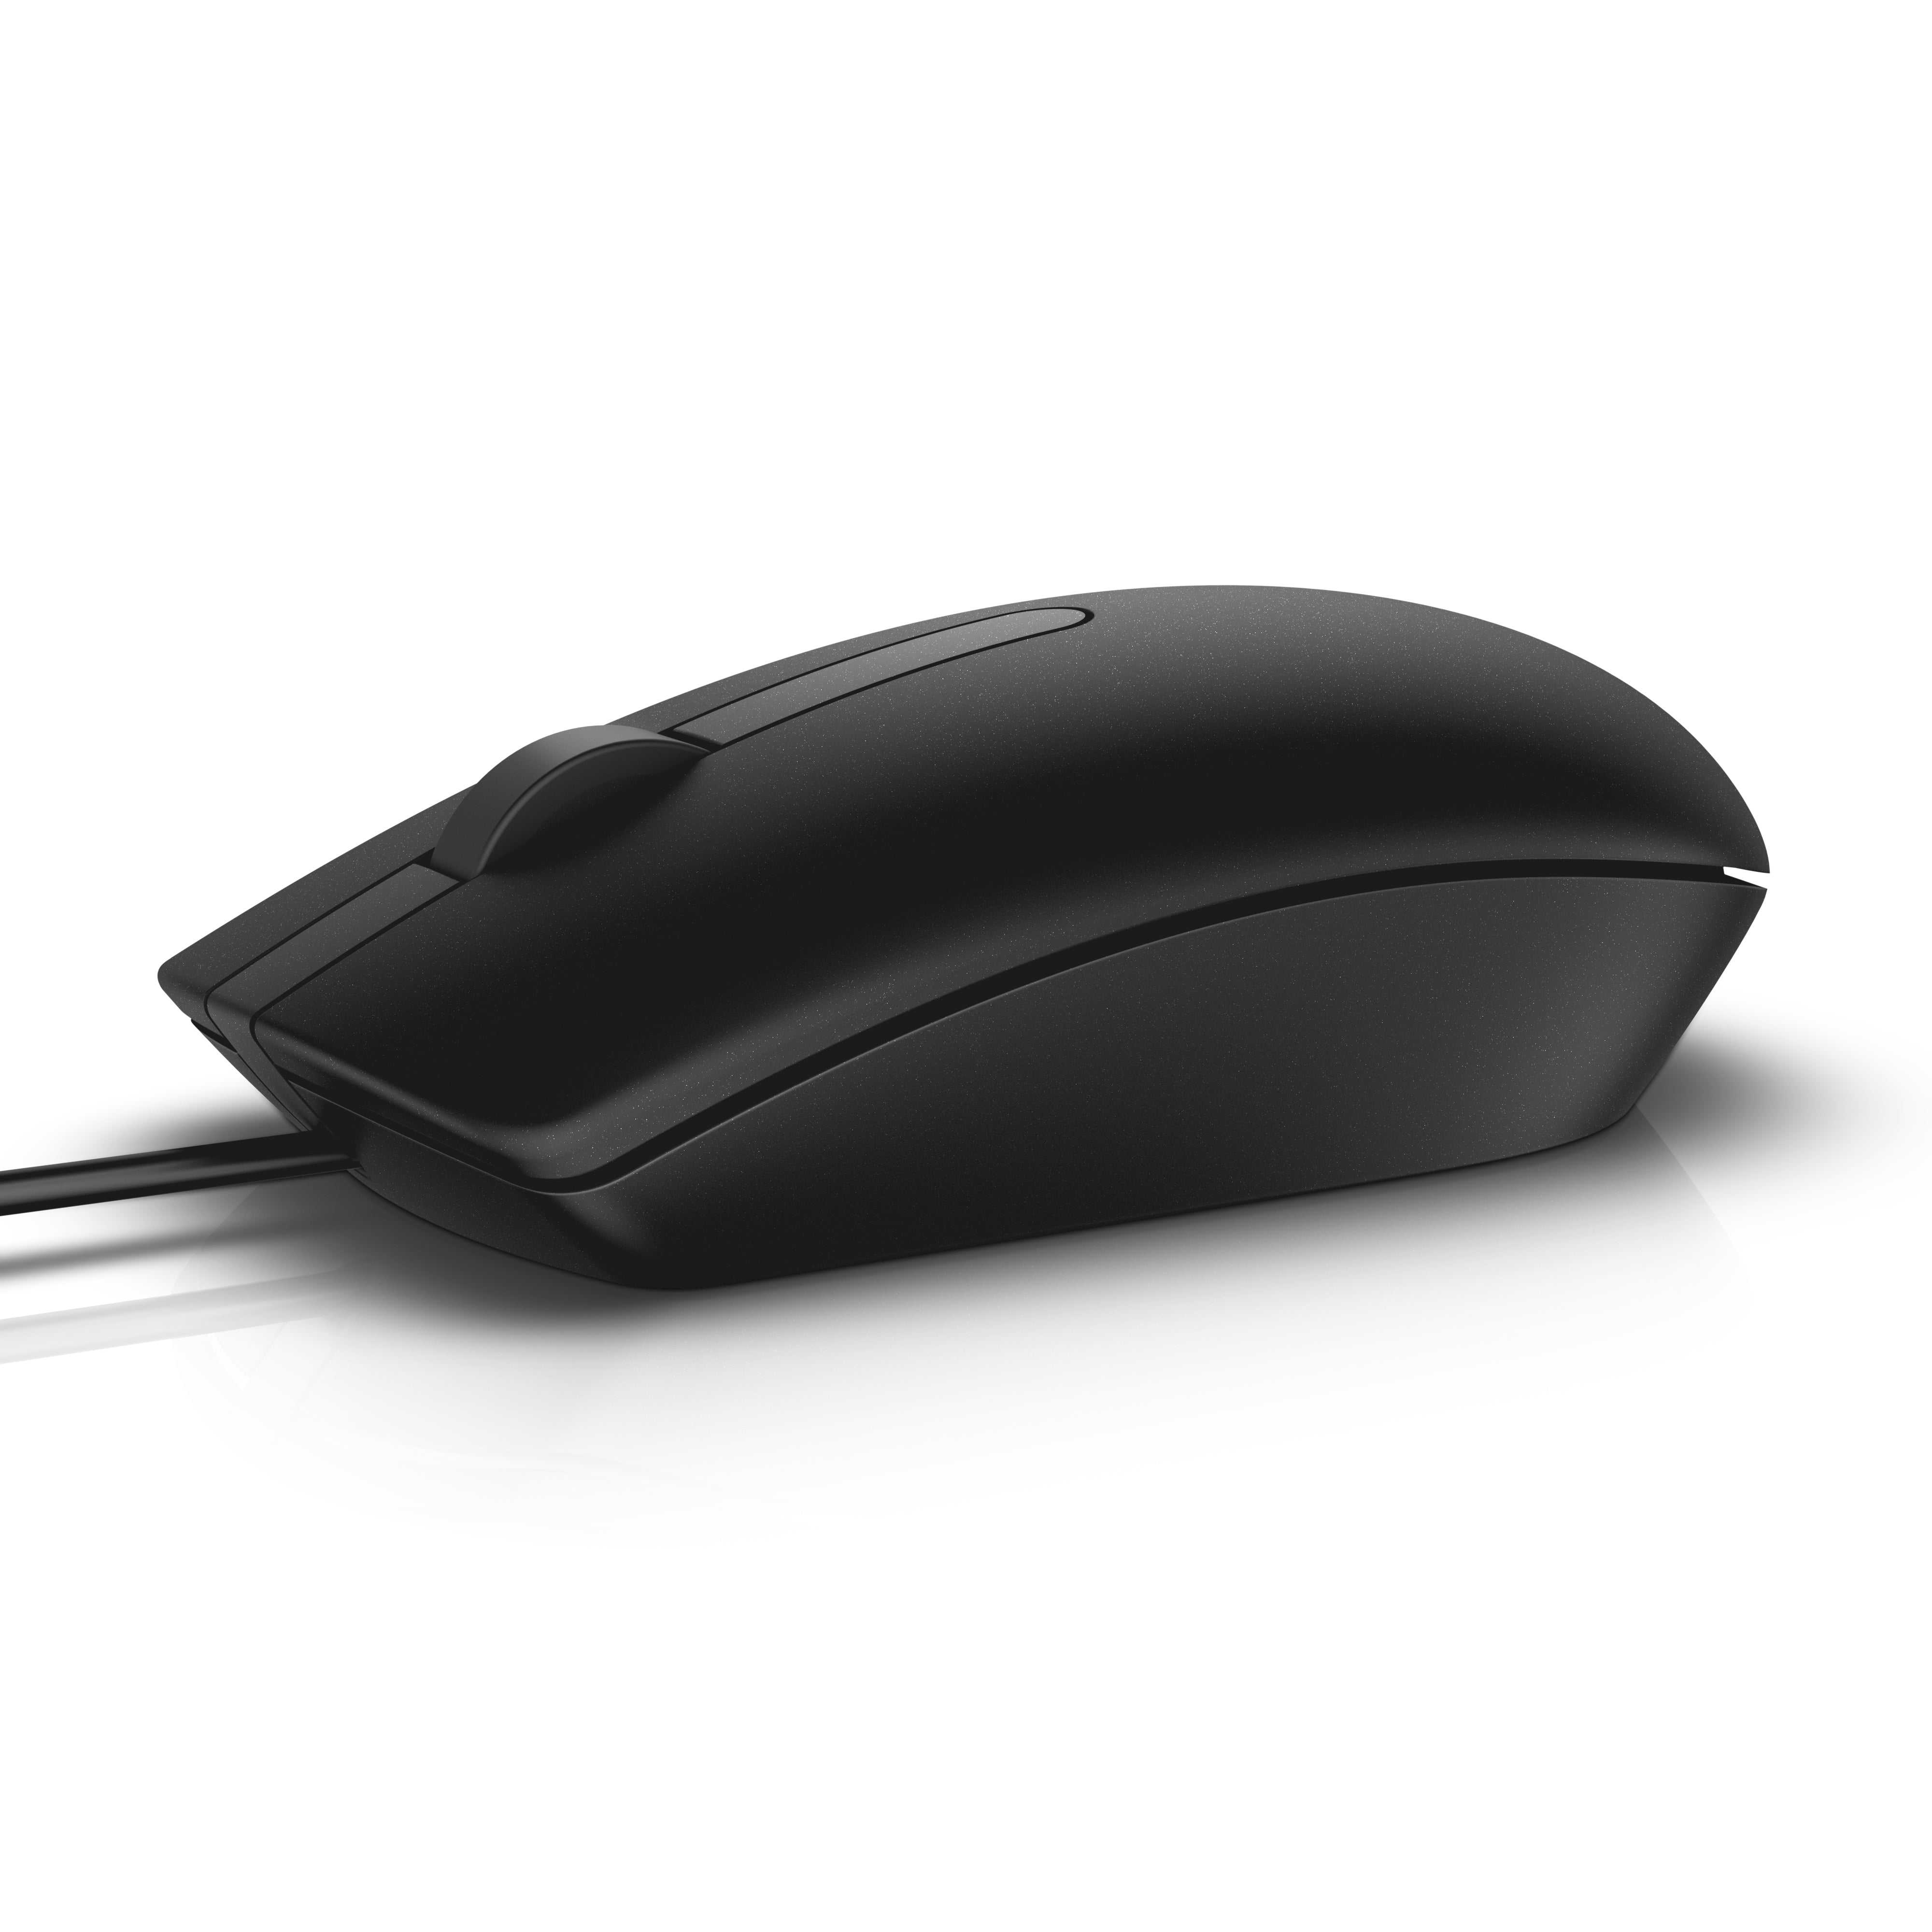 Dell-IMSourcing, Dell-Imsourcing Optical Mouse - Ms116 - Black